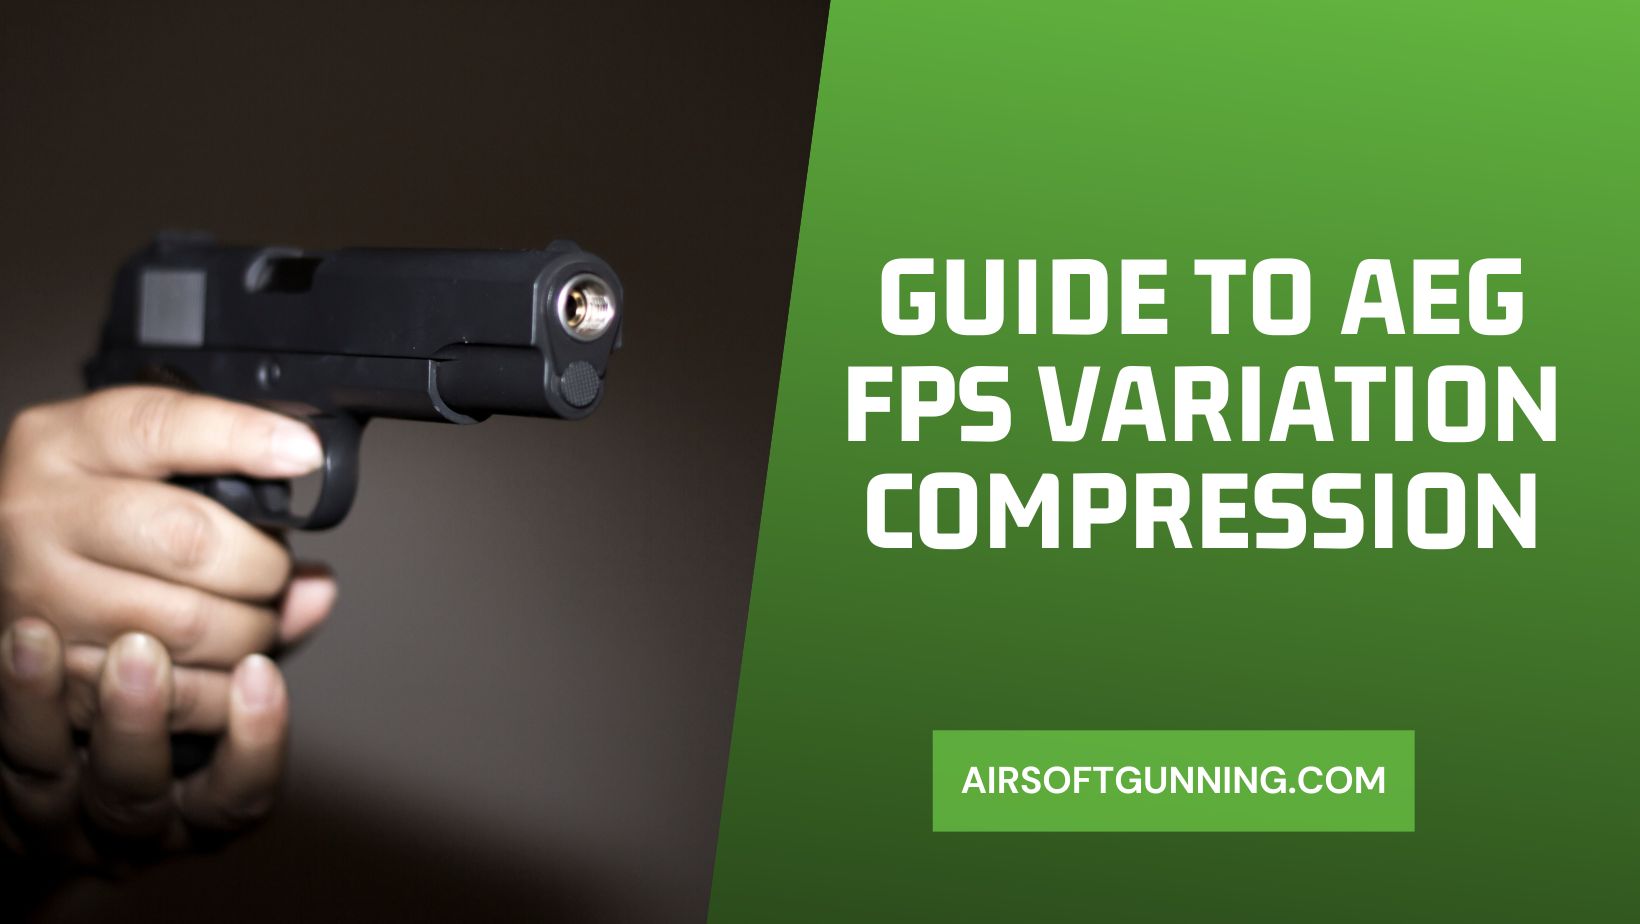 Guide to AEG FPS Variation Compression